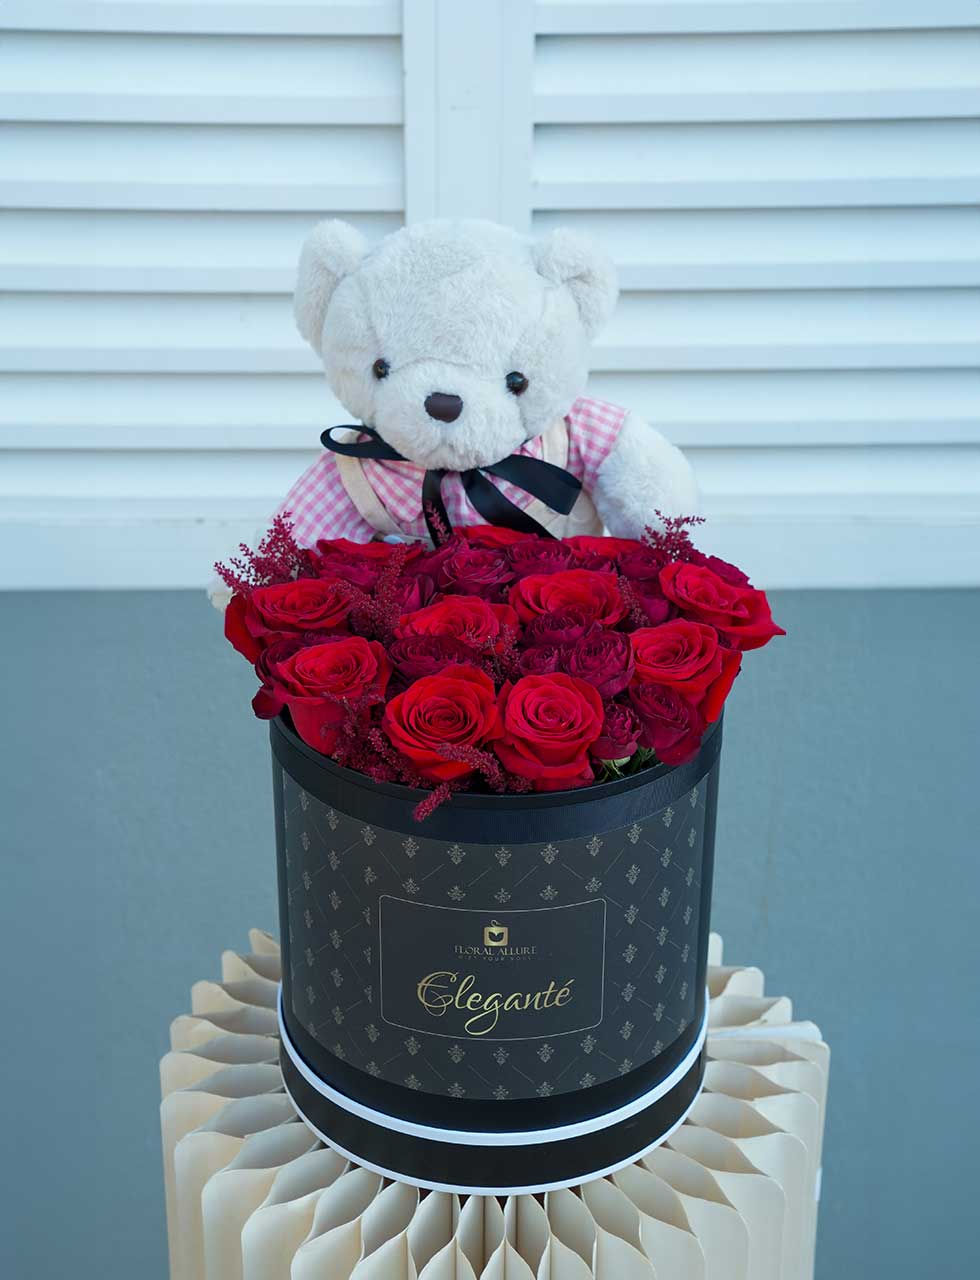 roses with teddy for valentine's day